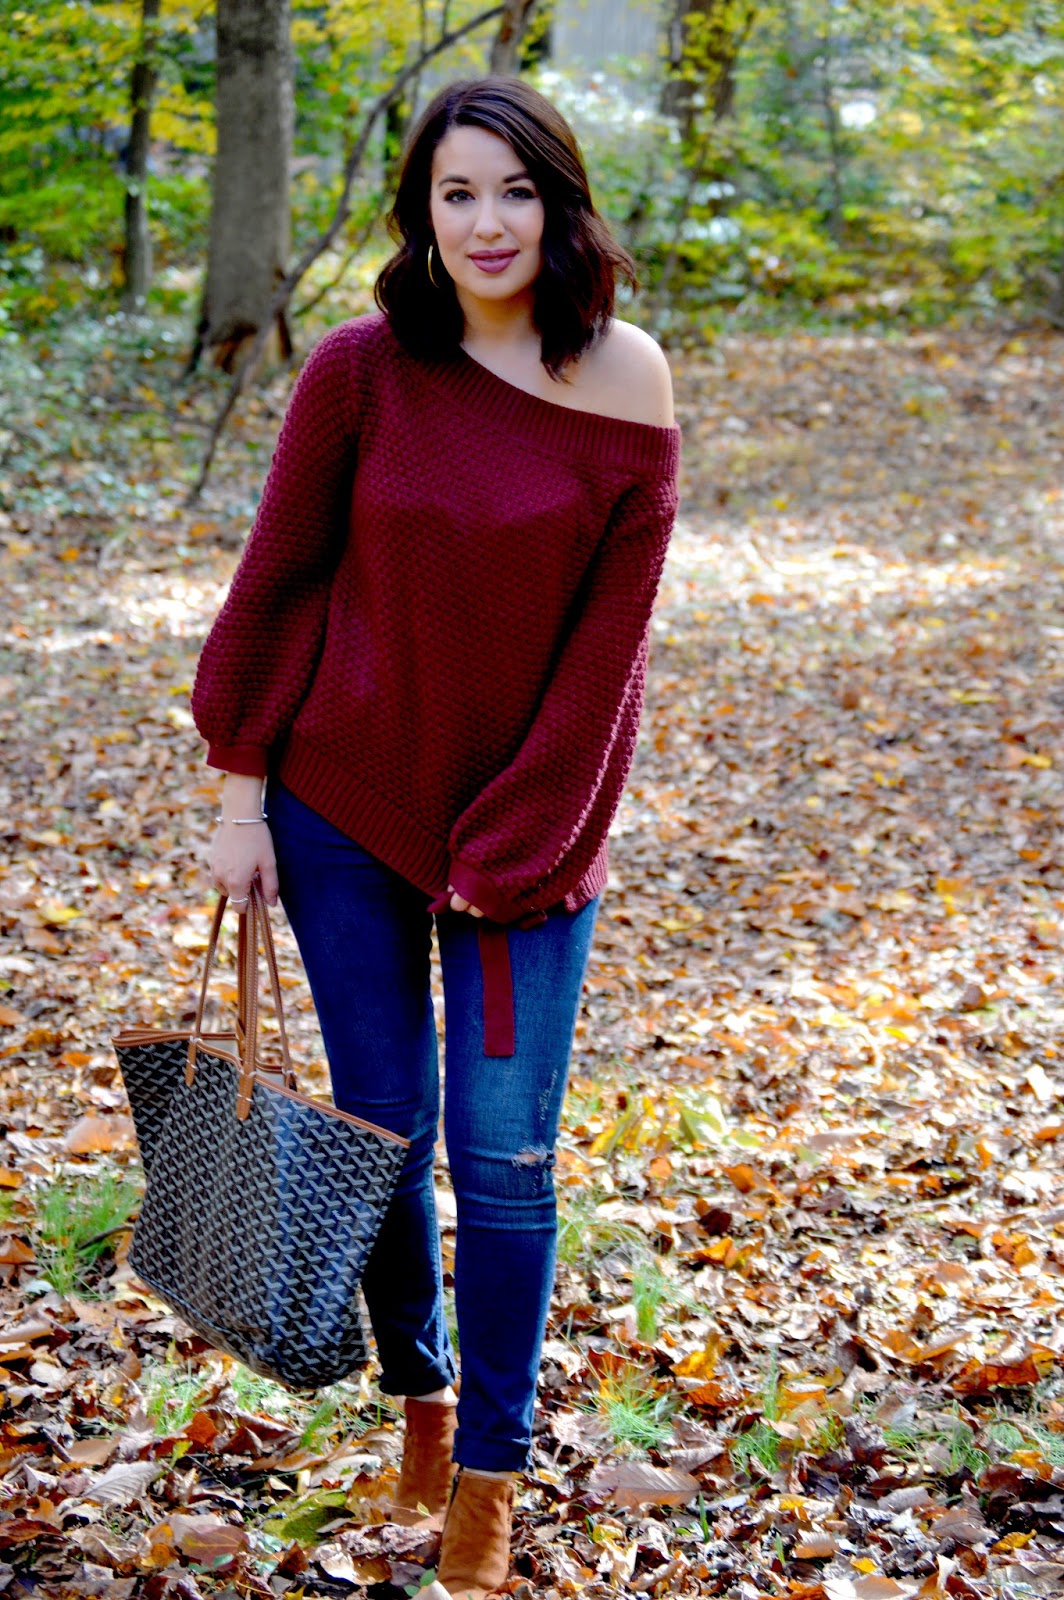 Rosy Outlook: Cozy Slouchy Sweater + FF Link-Up!